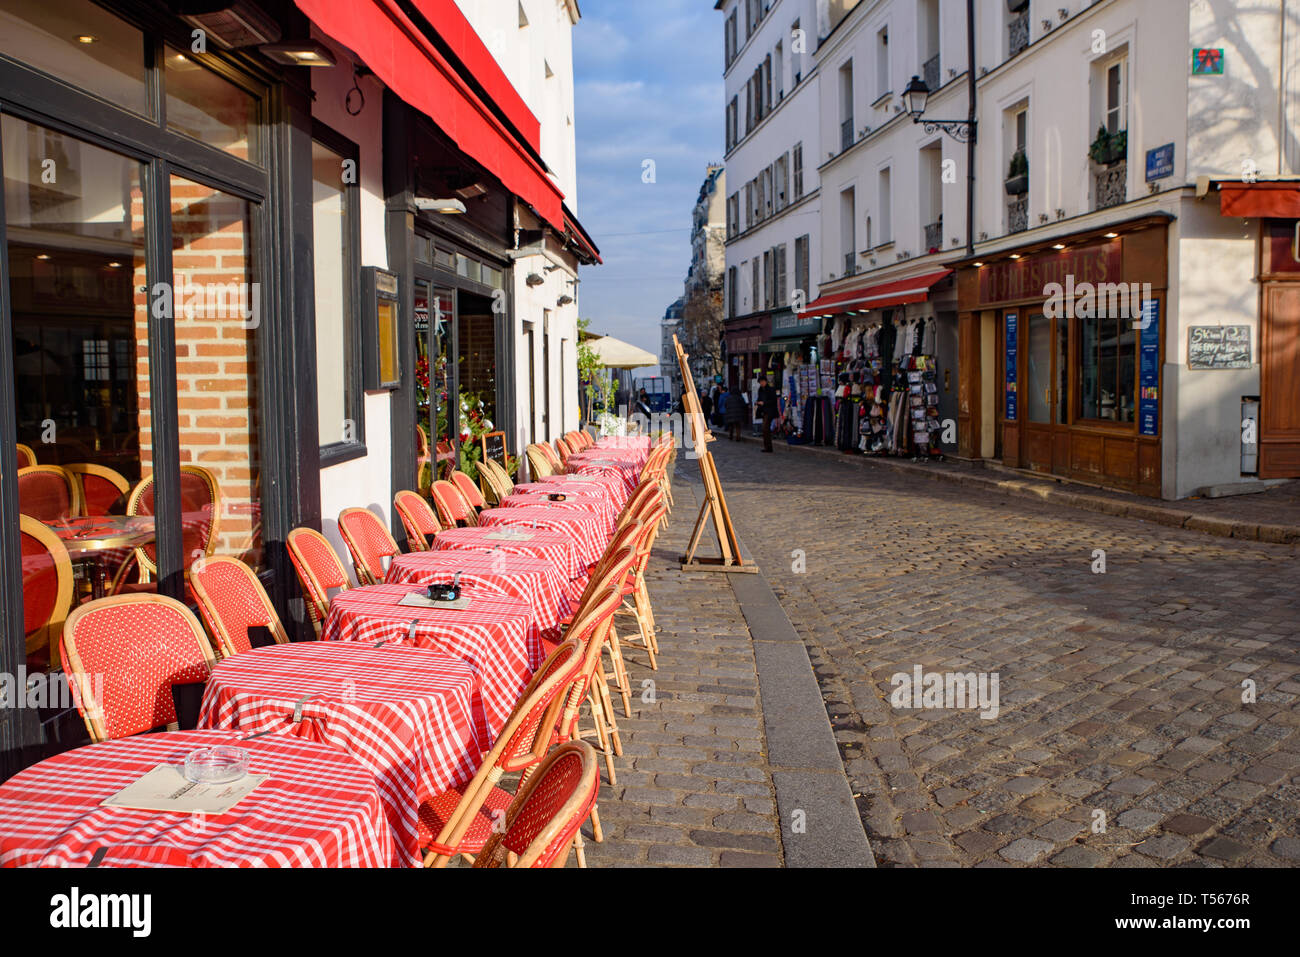 The outdoor seating of restaurant at the square of Place du Tertre in Montmartre, France Stock Photo